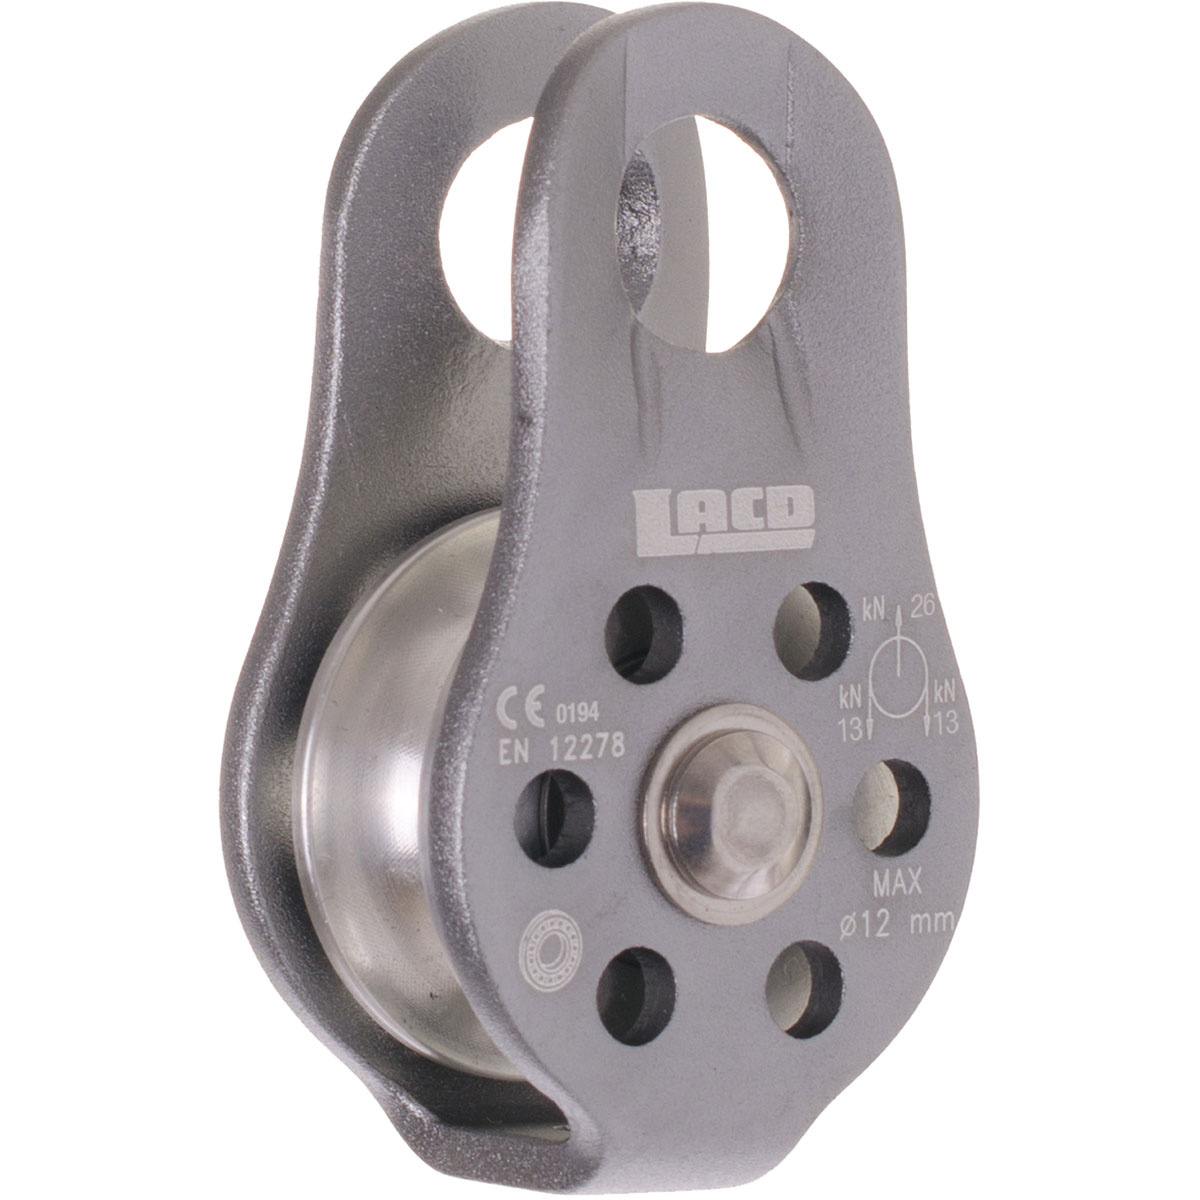 Image of LACD Carrucola Pulley Fix small